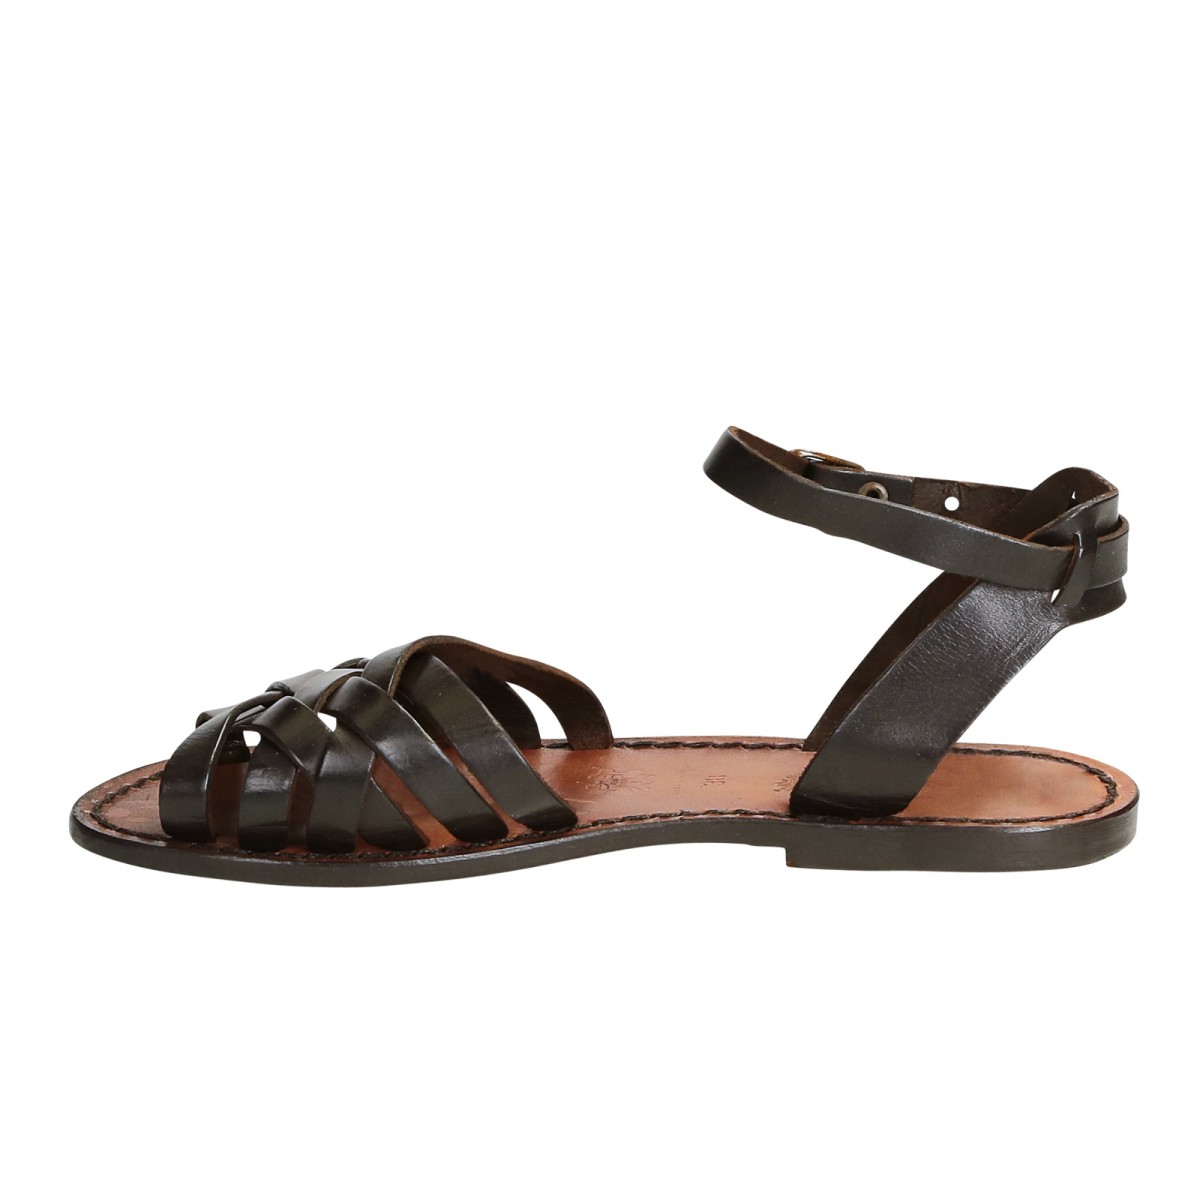 Handmade leather sandals for women brown color | The leather craftsmen